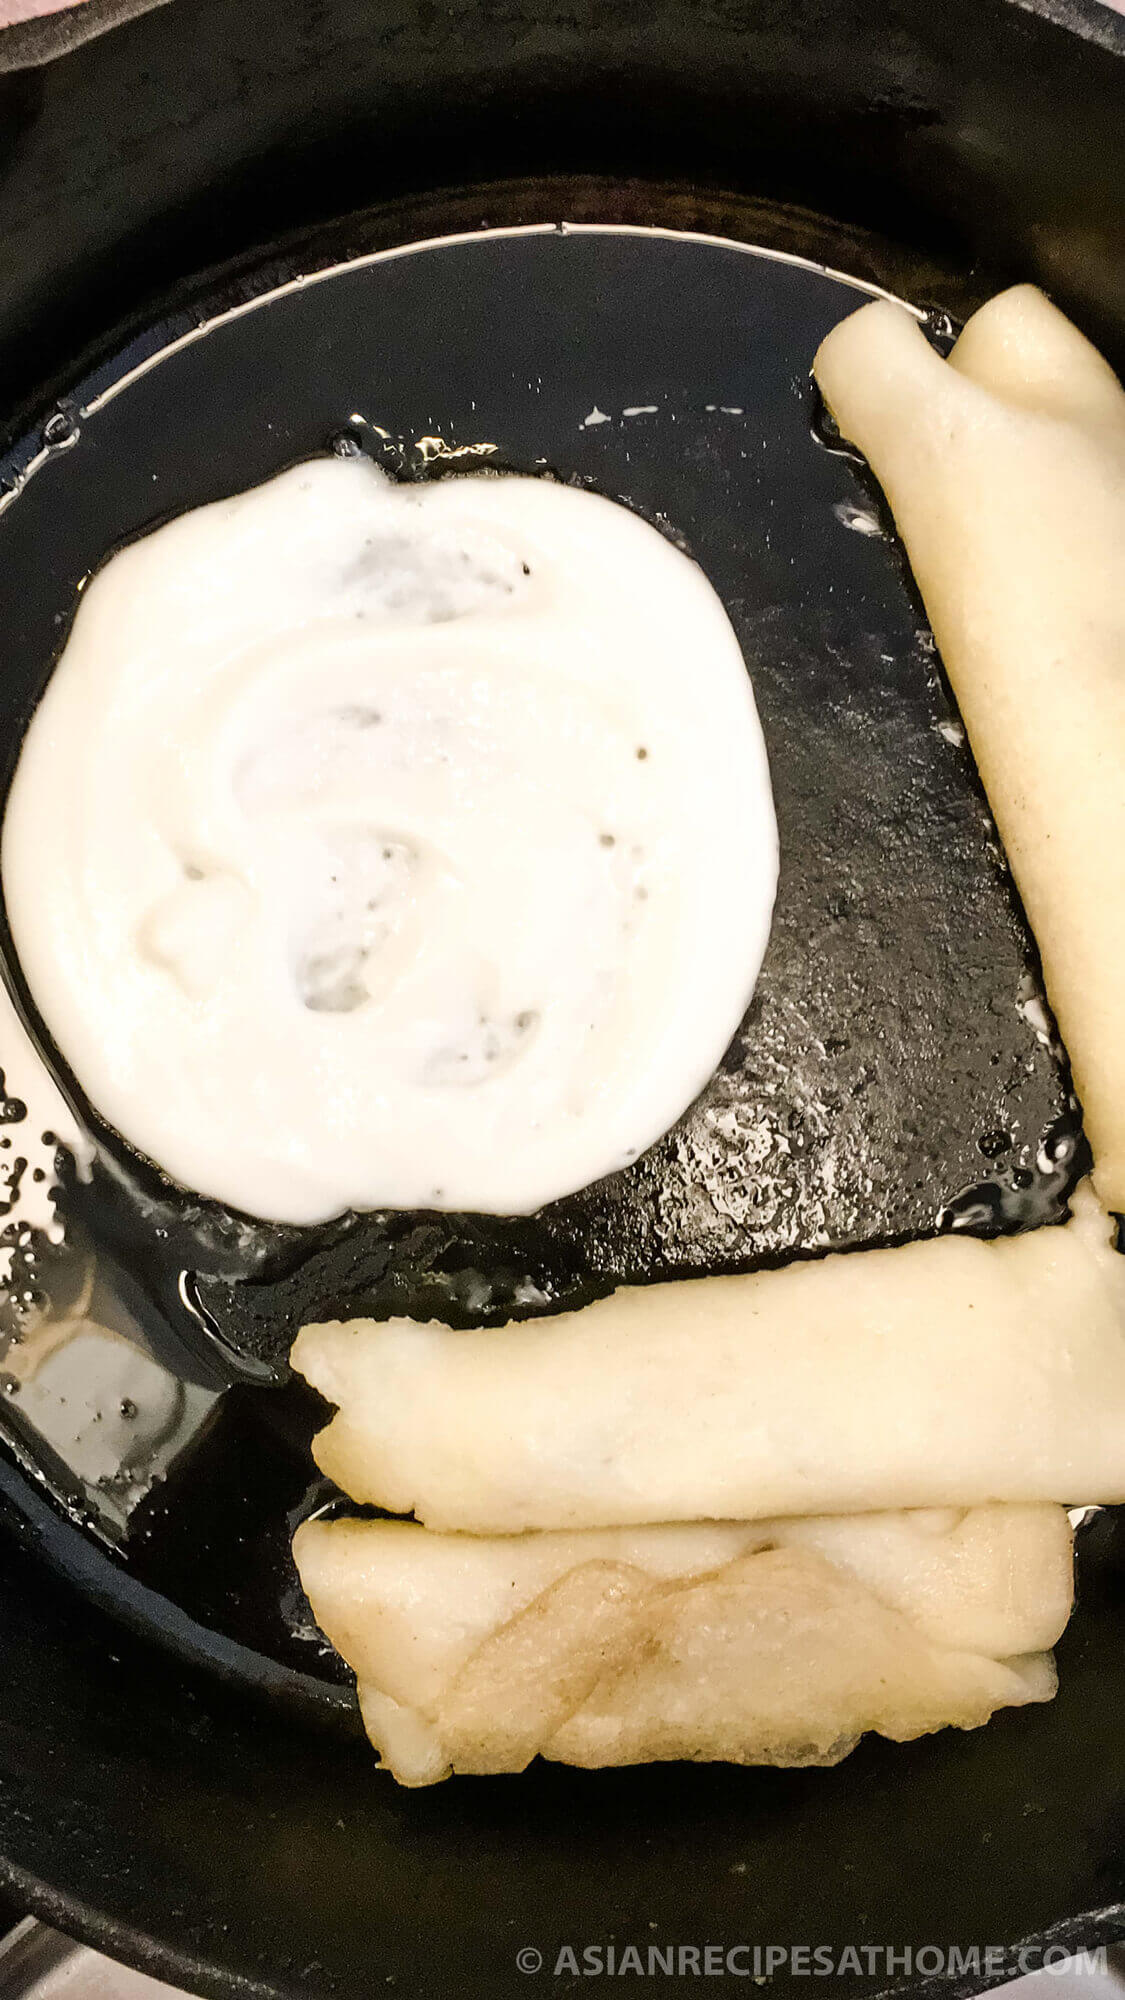 Make a circle with the sweet rice powder mixture in the pan for the sweet rice cakes dessert.